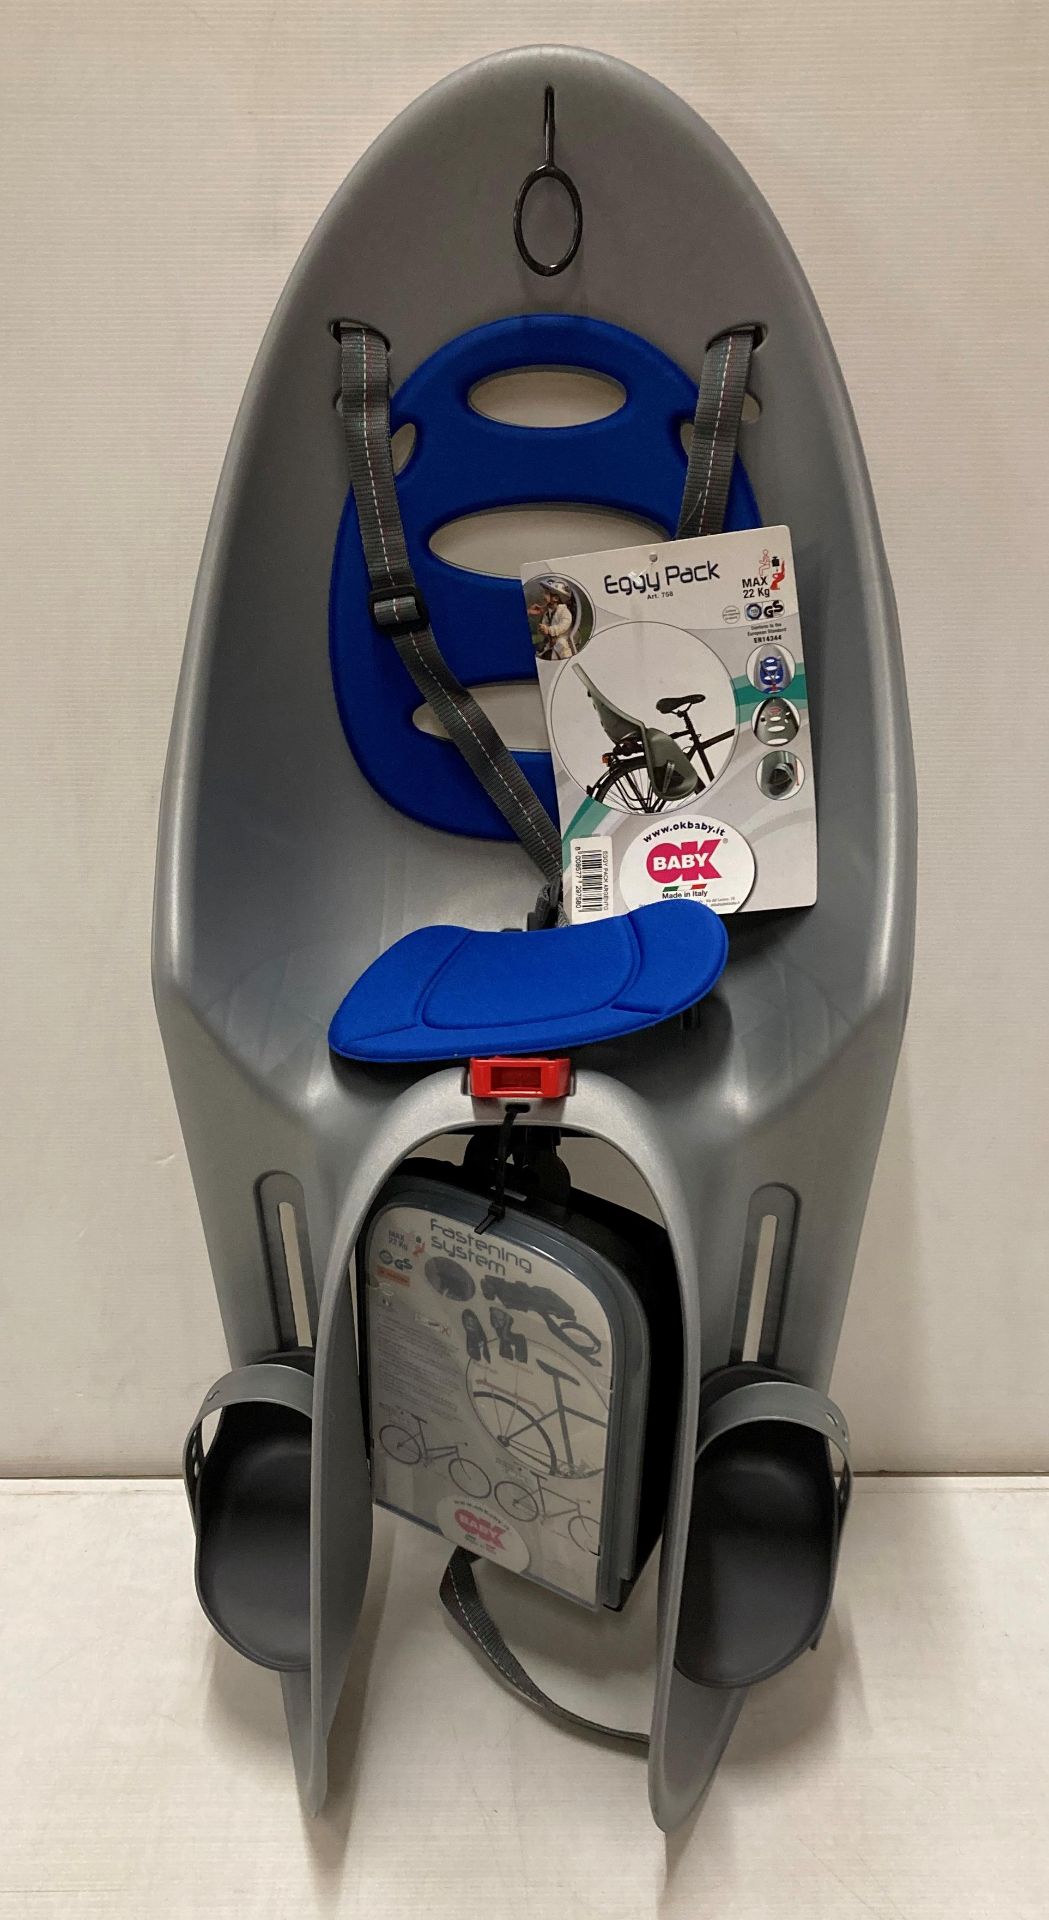 OK Baby Eggy Pack deluxe child safety bicycle seat (saleroom location: L06)